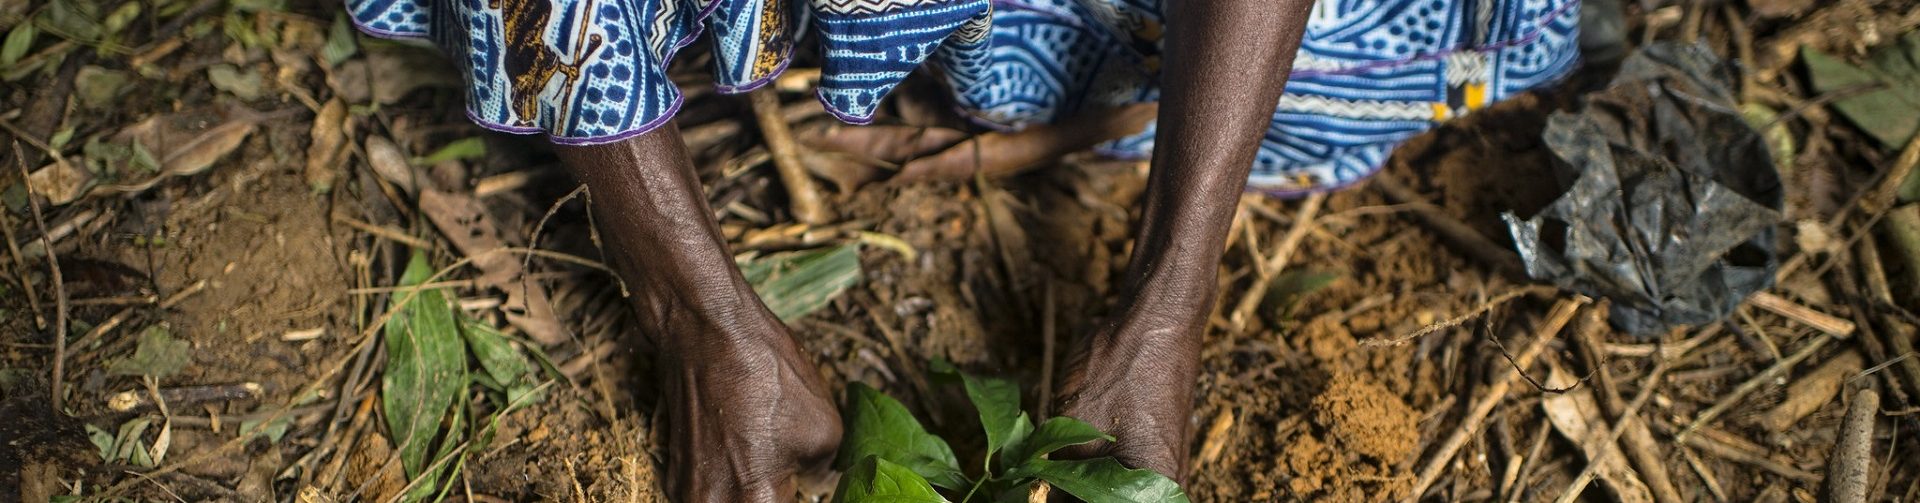 Webinar: The role of land certification in securing women’s land rights on collective lands